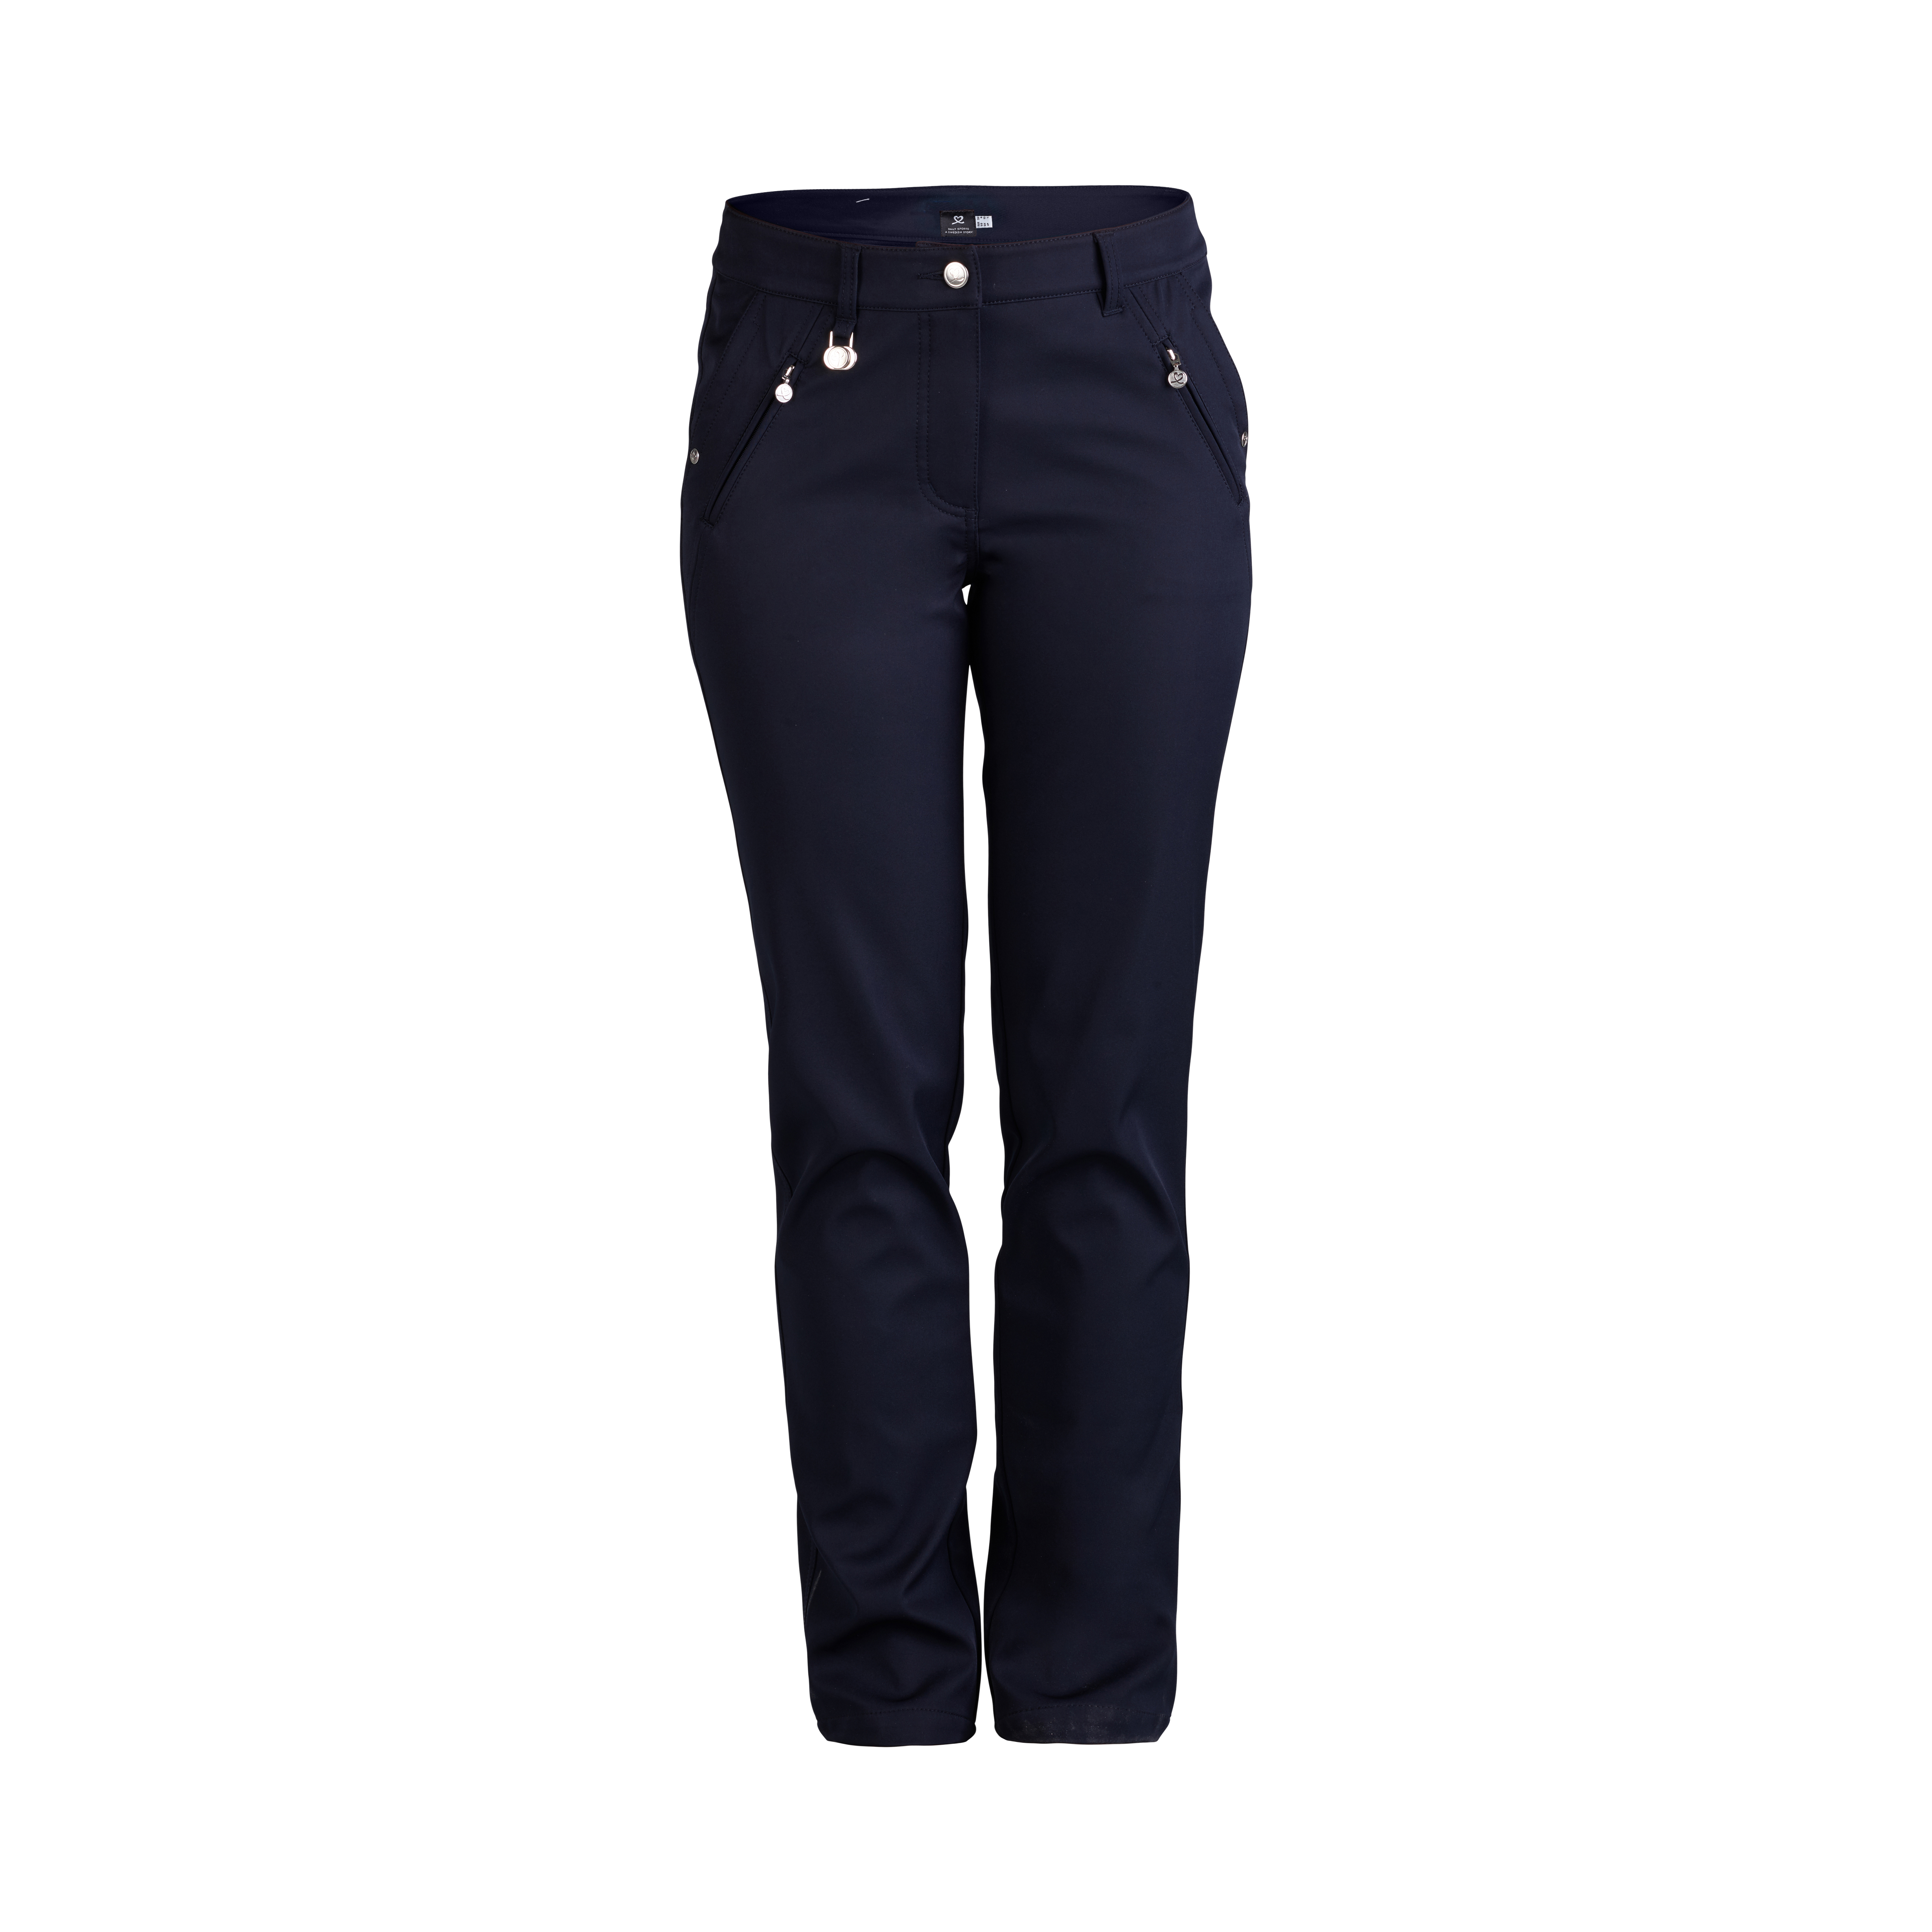 Ladies Daily Sports Irene Thermal Trousers 001/205/206 Navy